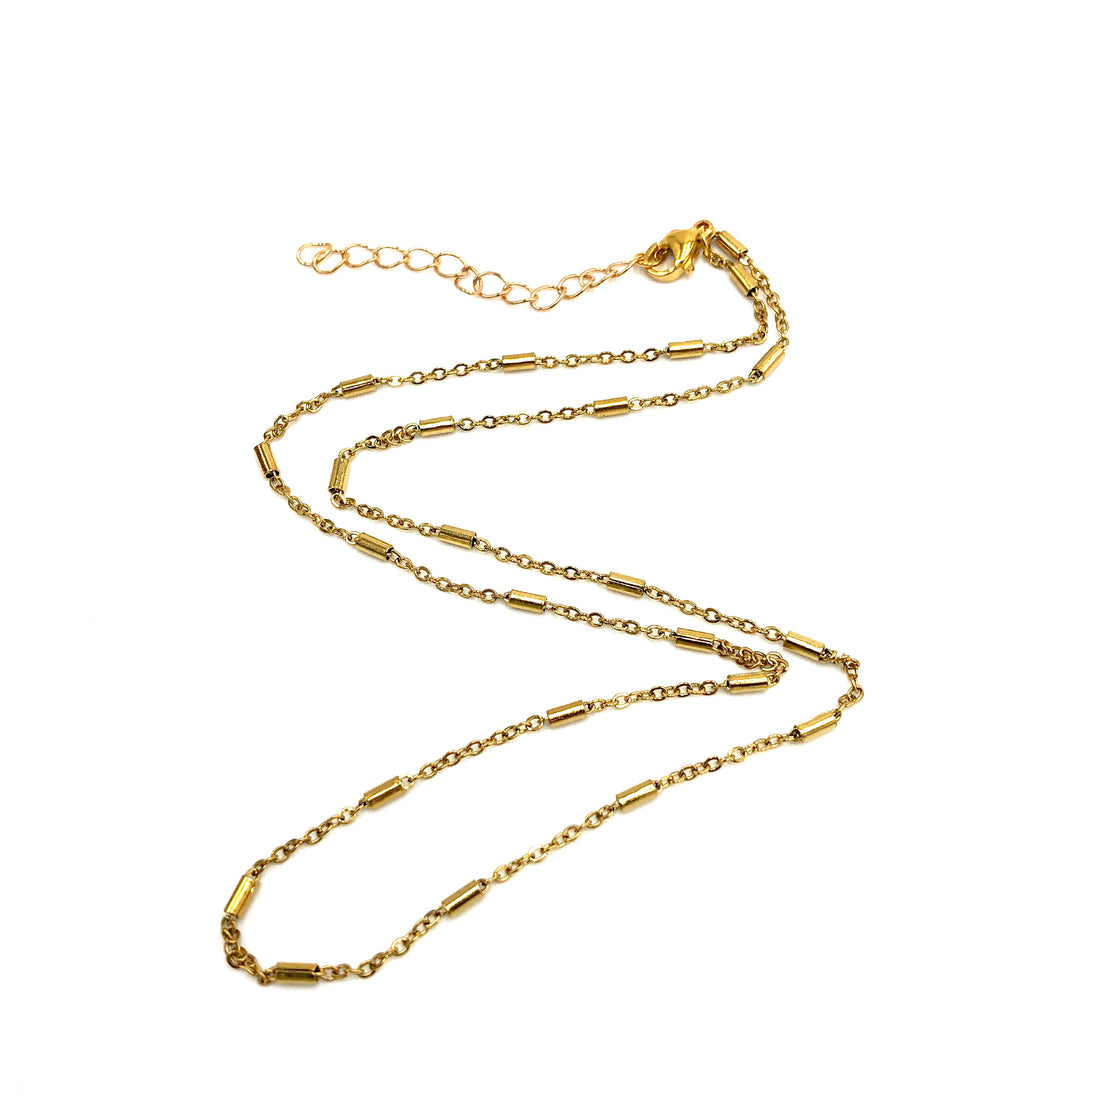 Fine Adelaide Chain Necklace